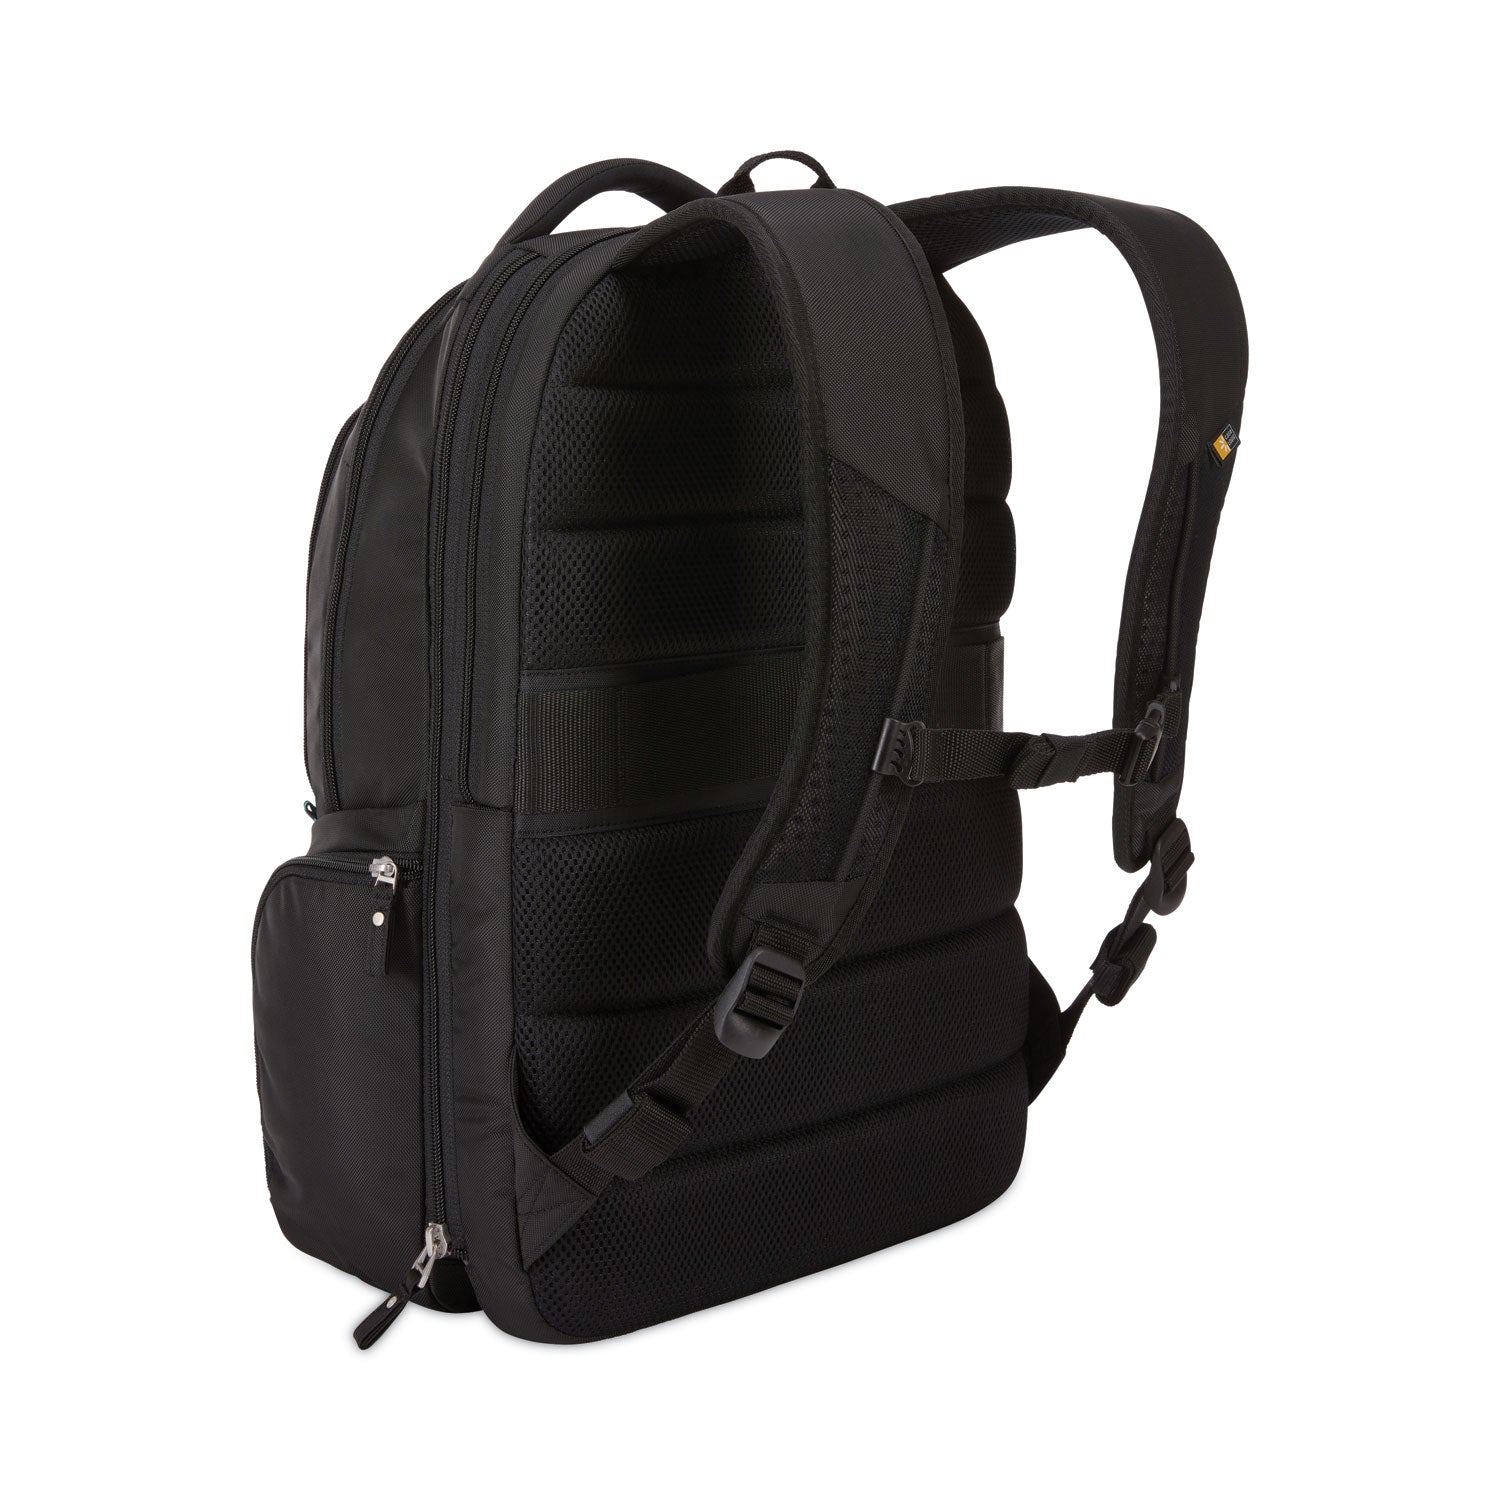 checkpoint-friendly-backpack-fits-devices-up-to-156-polyester-276-x-1339-x-1969-black_clg3203772 - 4